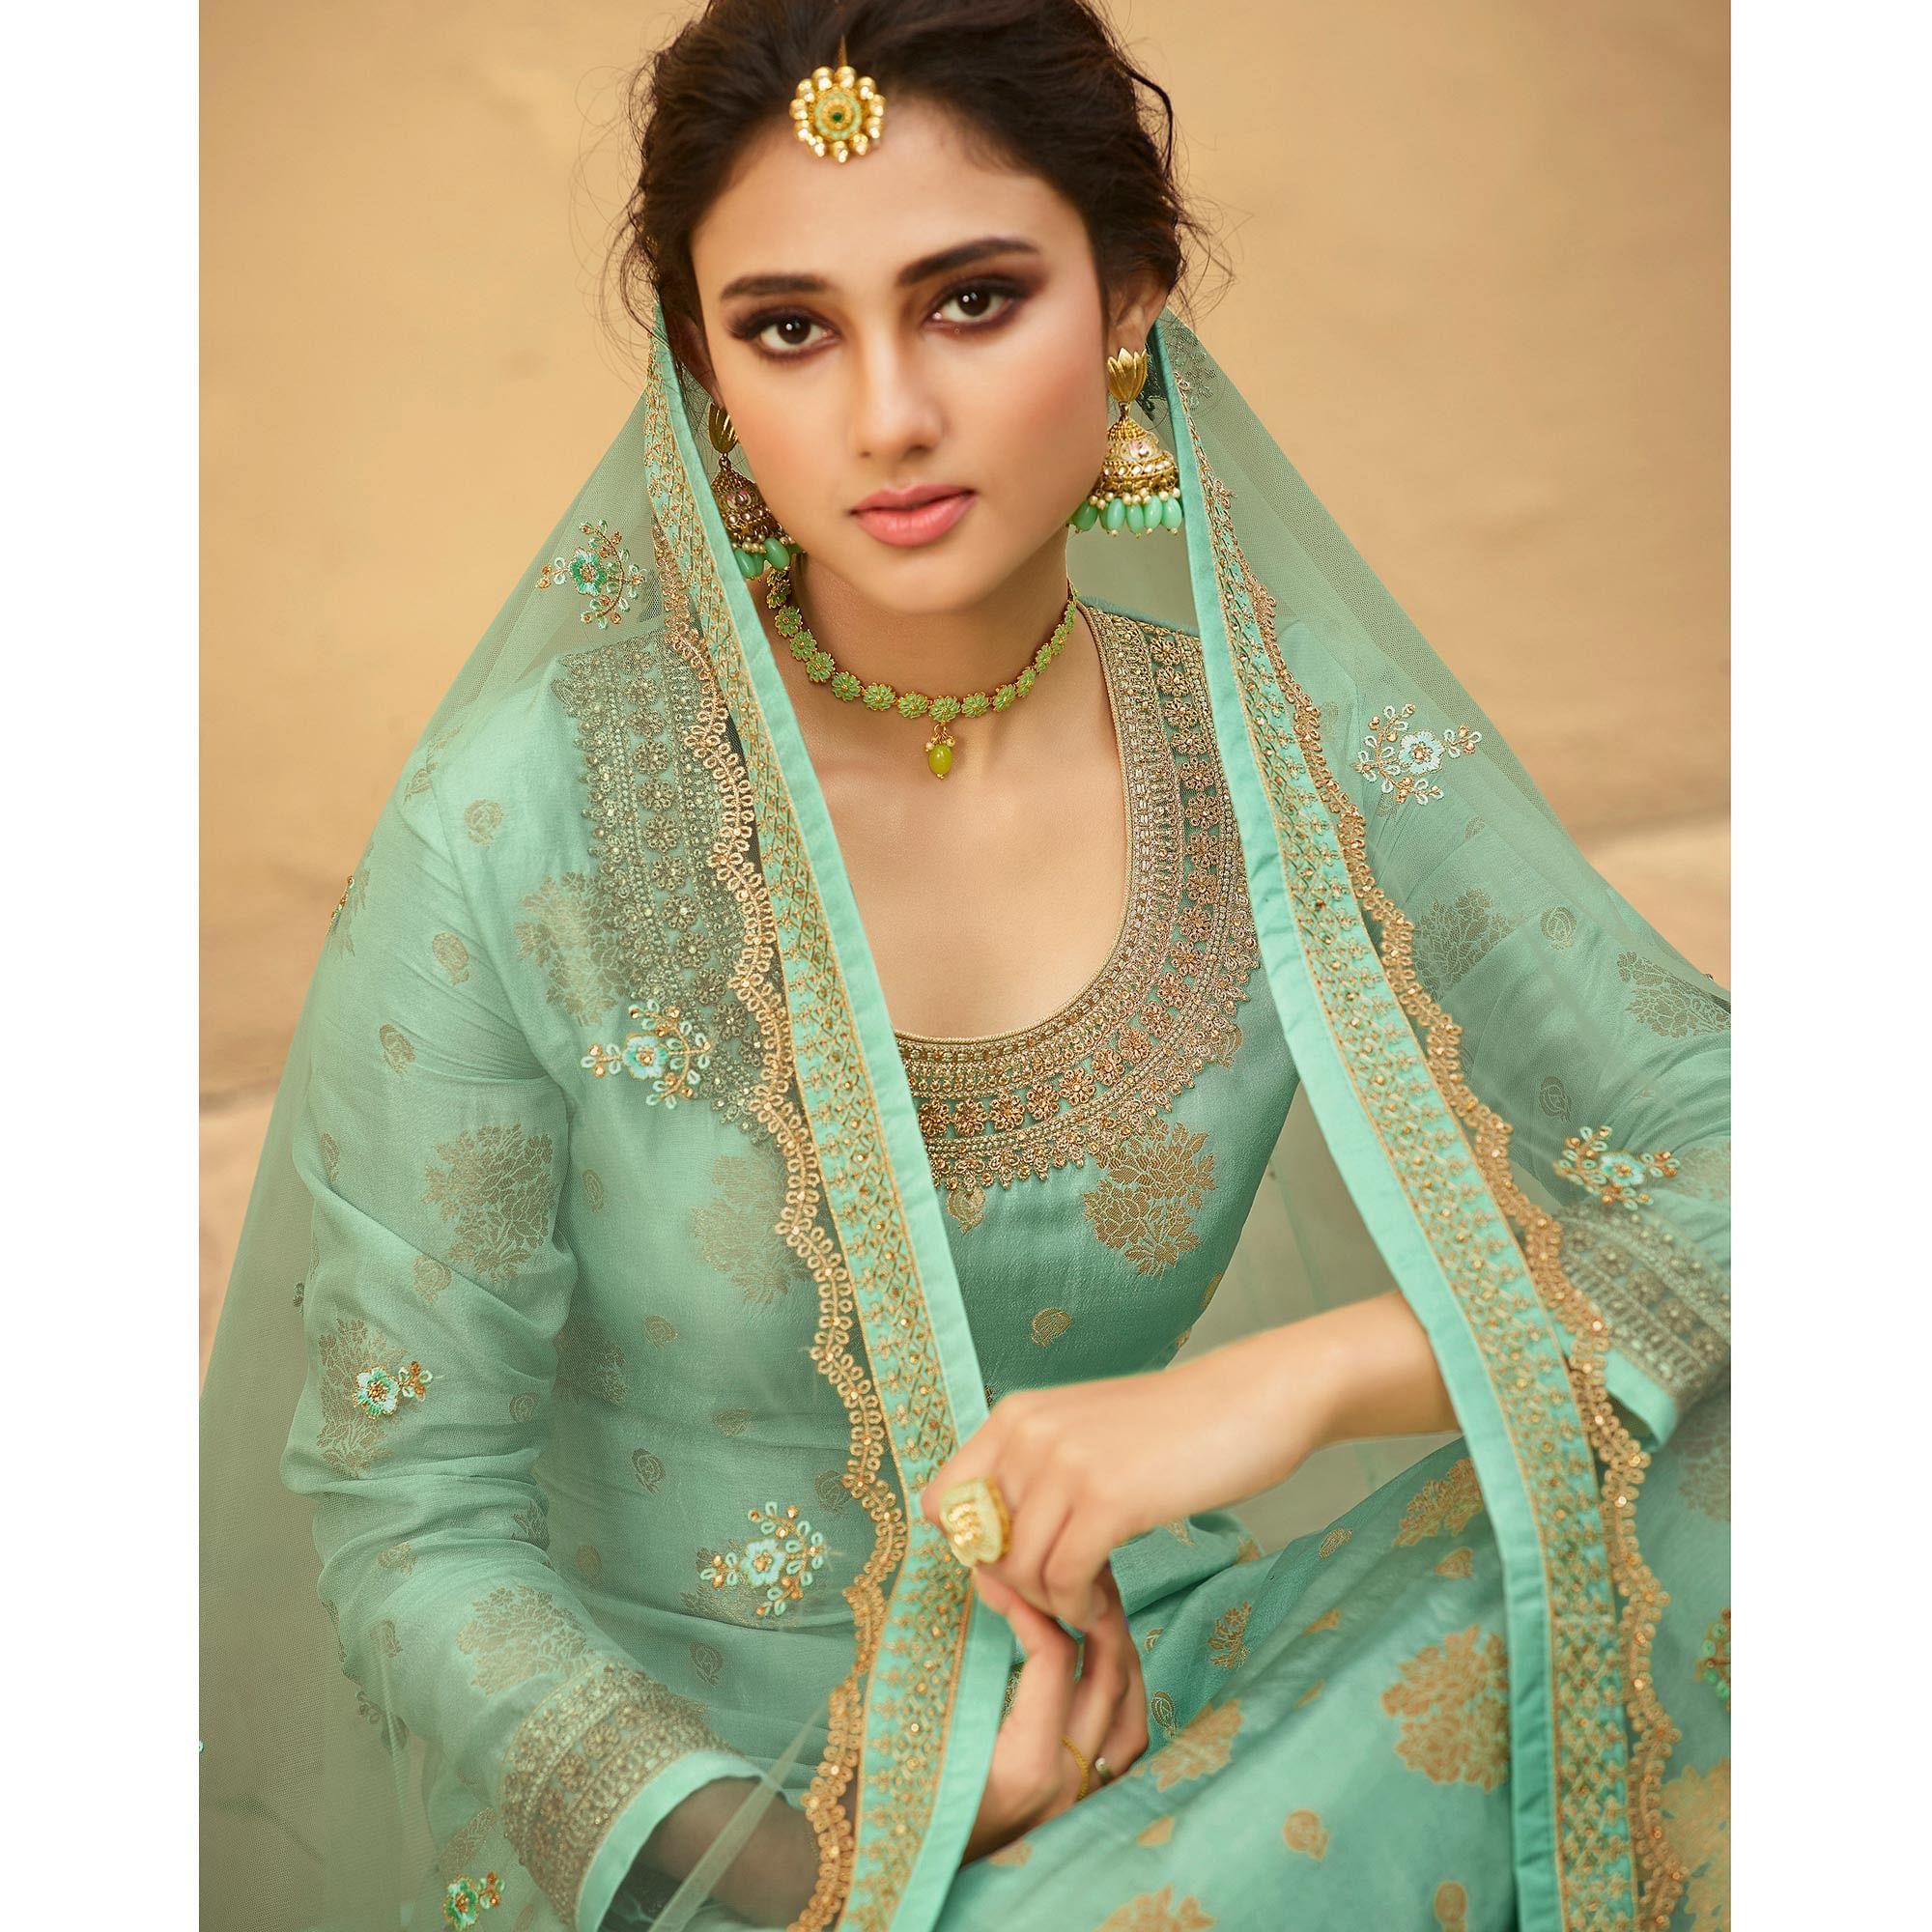 Partywear Designer Floral Embroidery Work Lightseagreen Dola Jaquard Silkplazzo Suit - Peachmode